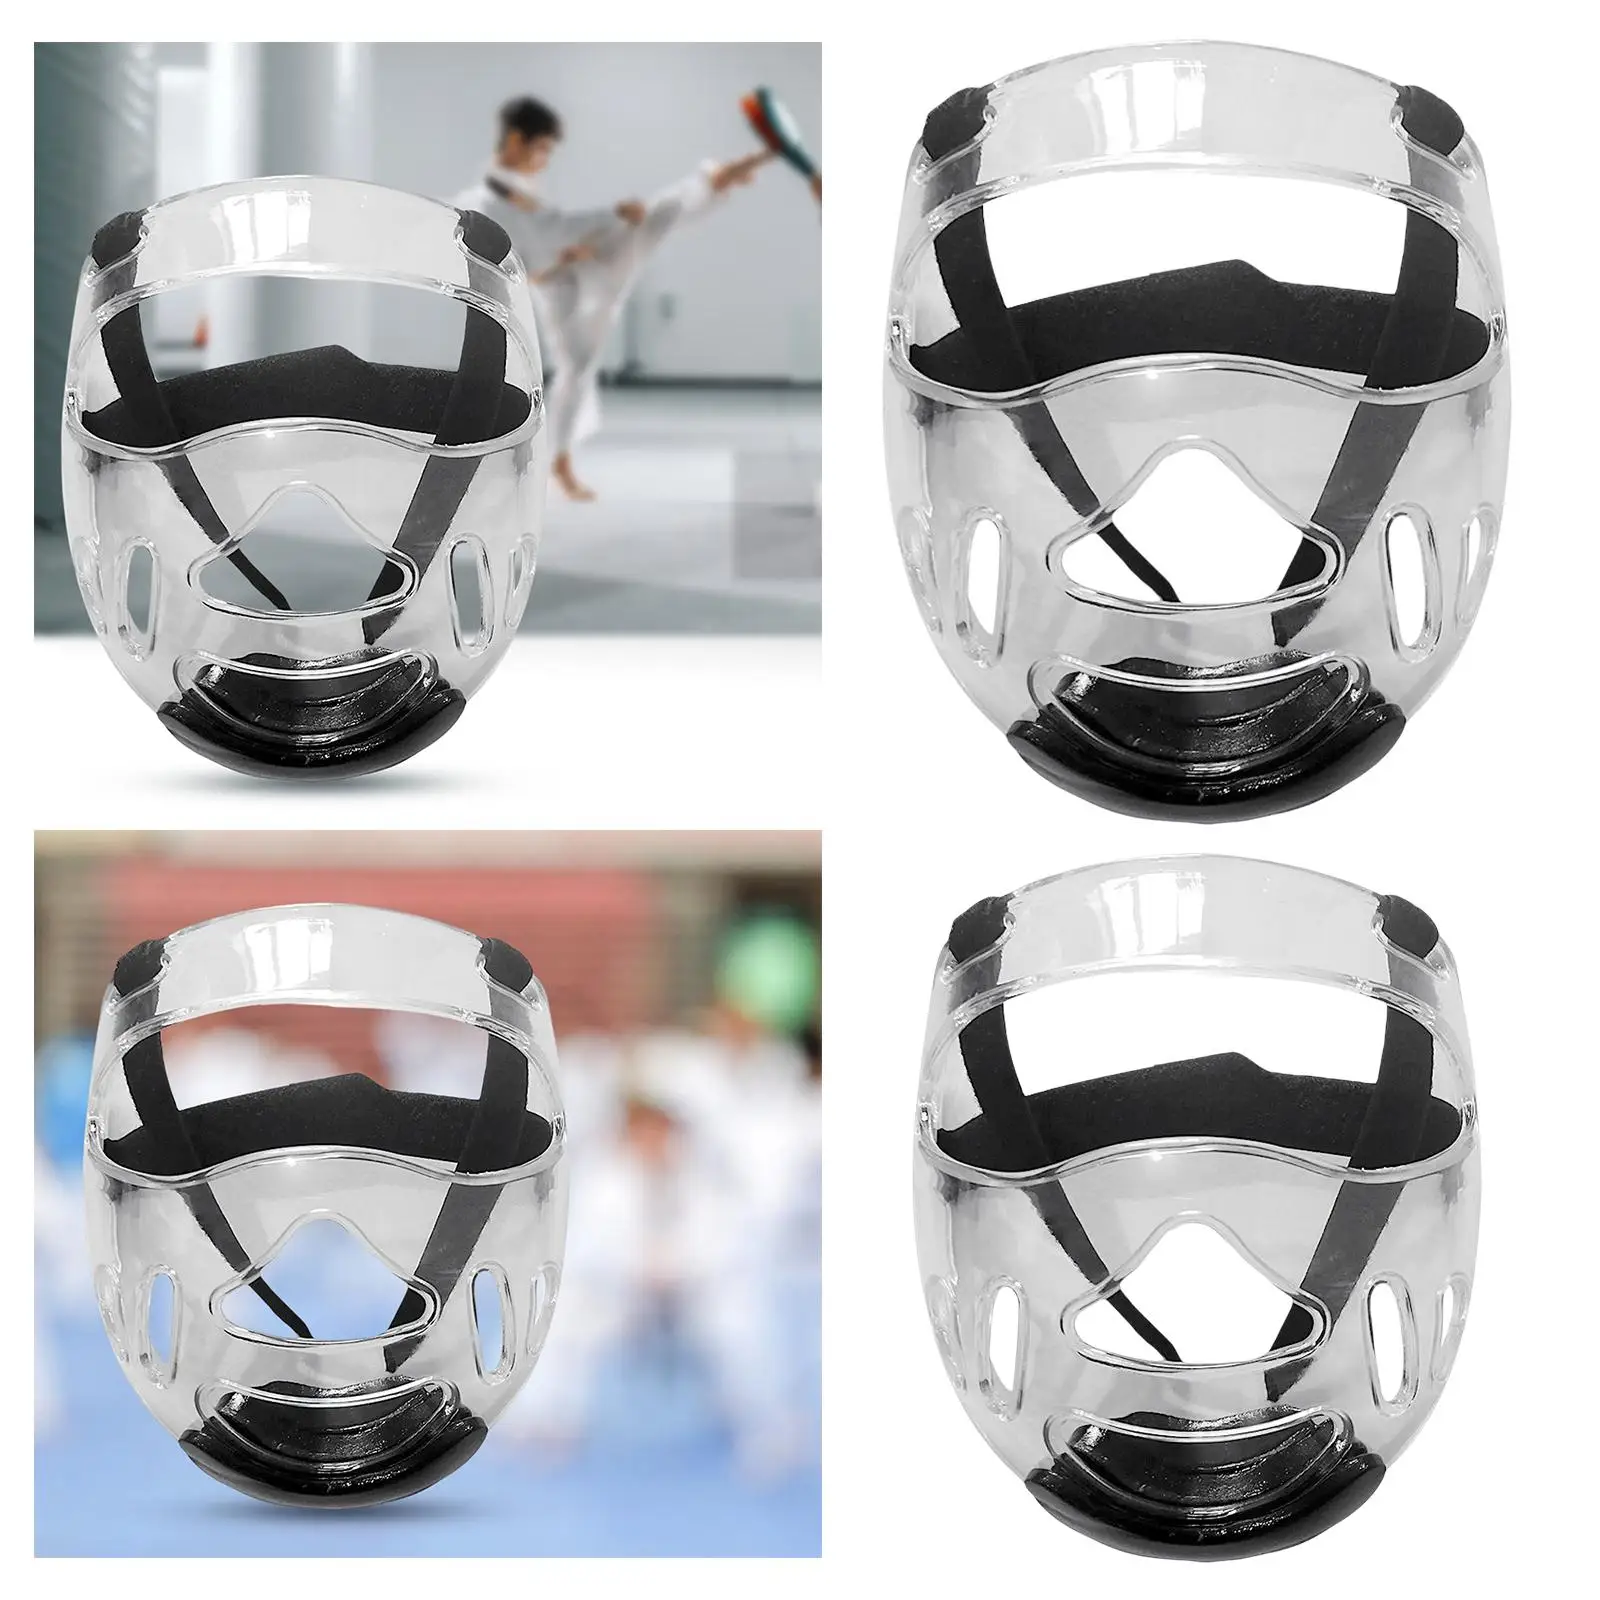 Transparent Taekwondo Face Shield Head Protector Sports Gear Boxing Headgear Helmet Cover for Improves Your Training Performance